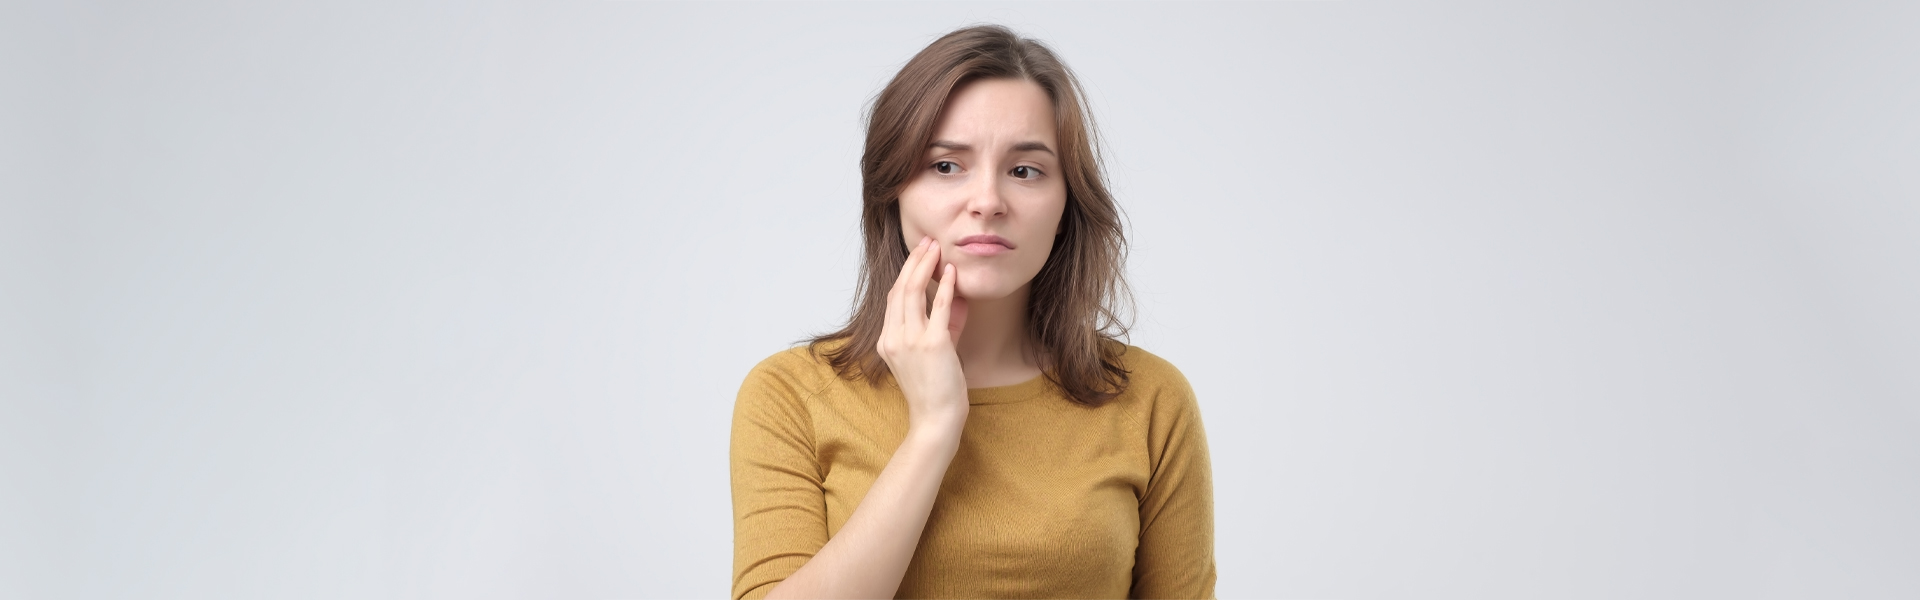 When Is A Toothache An Emergency?